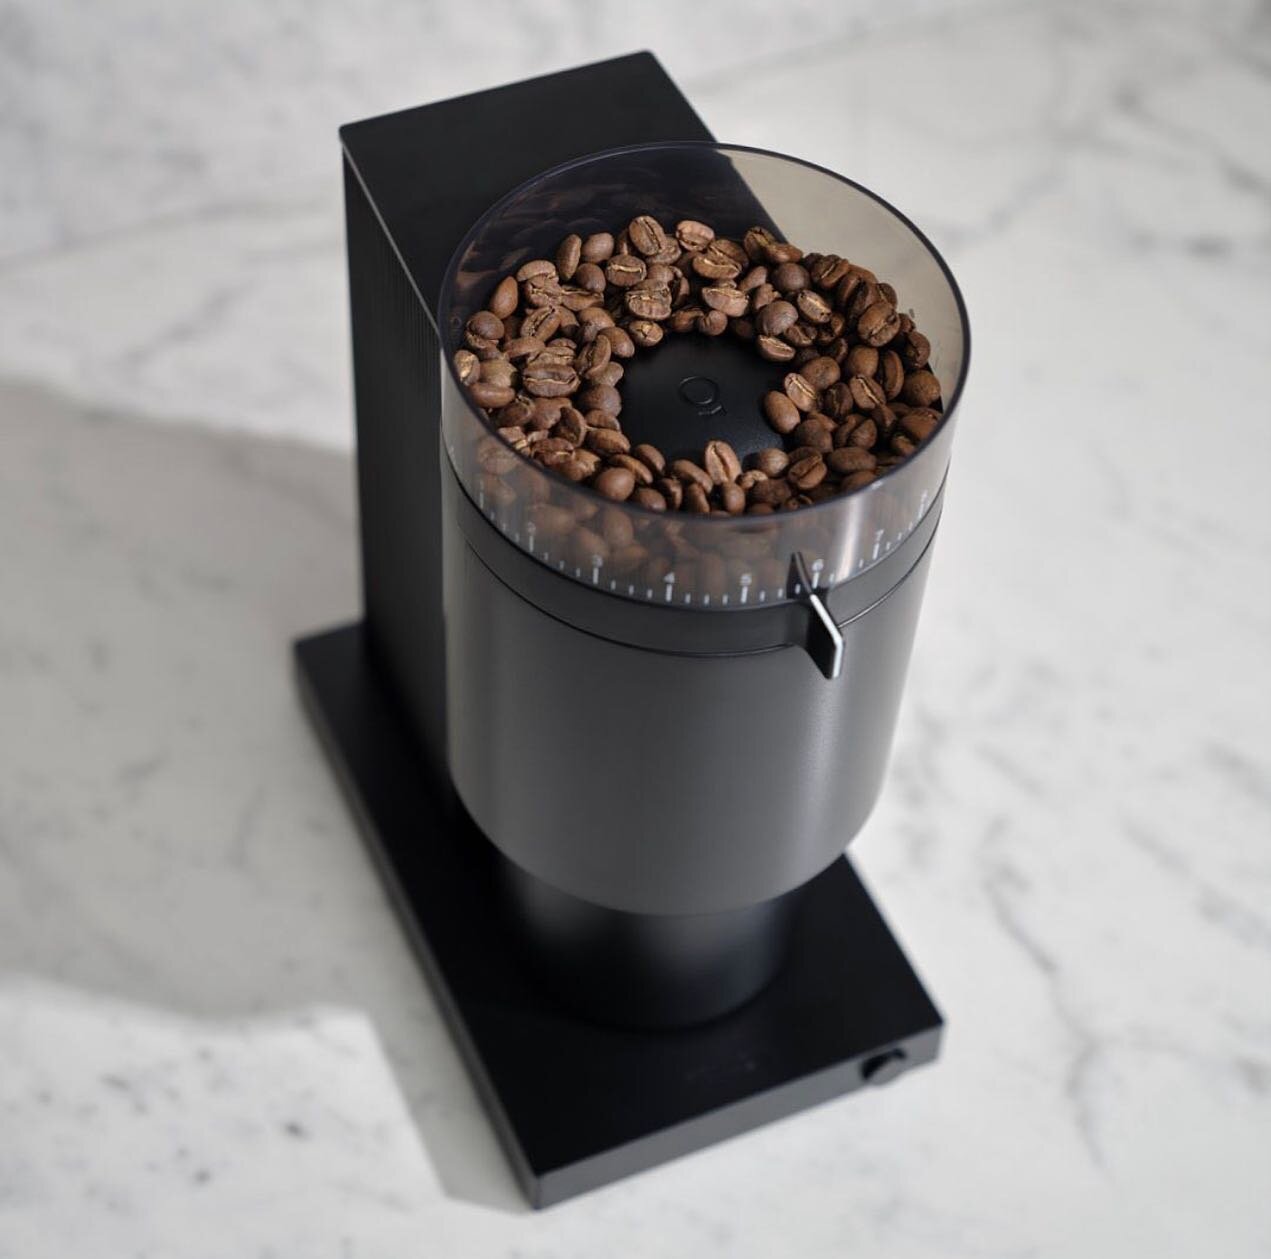 Starting your day with the perfect grind! ☕️✨ The Fellow Opus Grinder is the secret weapon for achieving barista-level precision at home. Say goodbye to inconsistent grinds and hello to flavourful perfection.
.
.
.
#percolatecoffee #specialtycoffee #